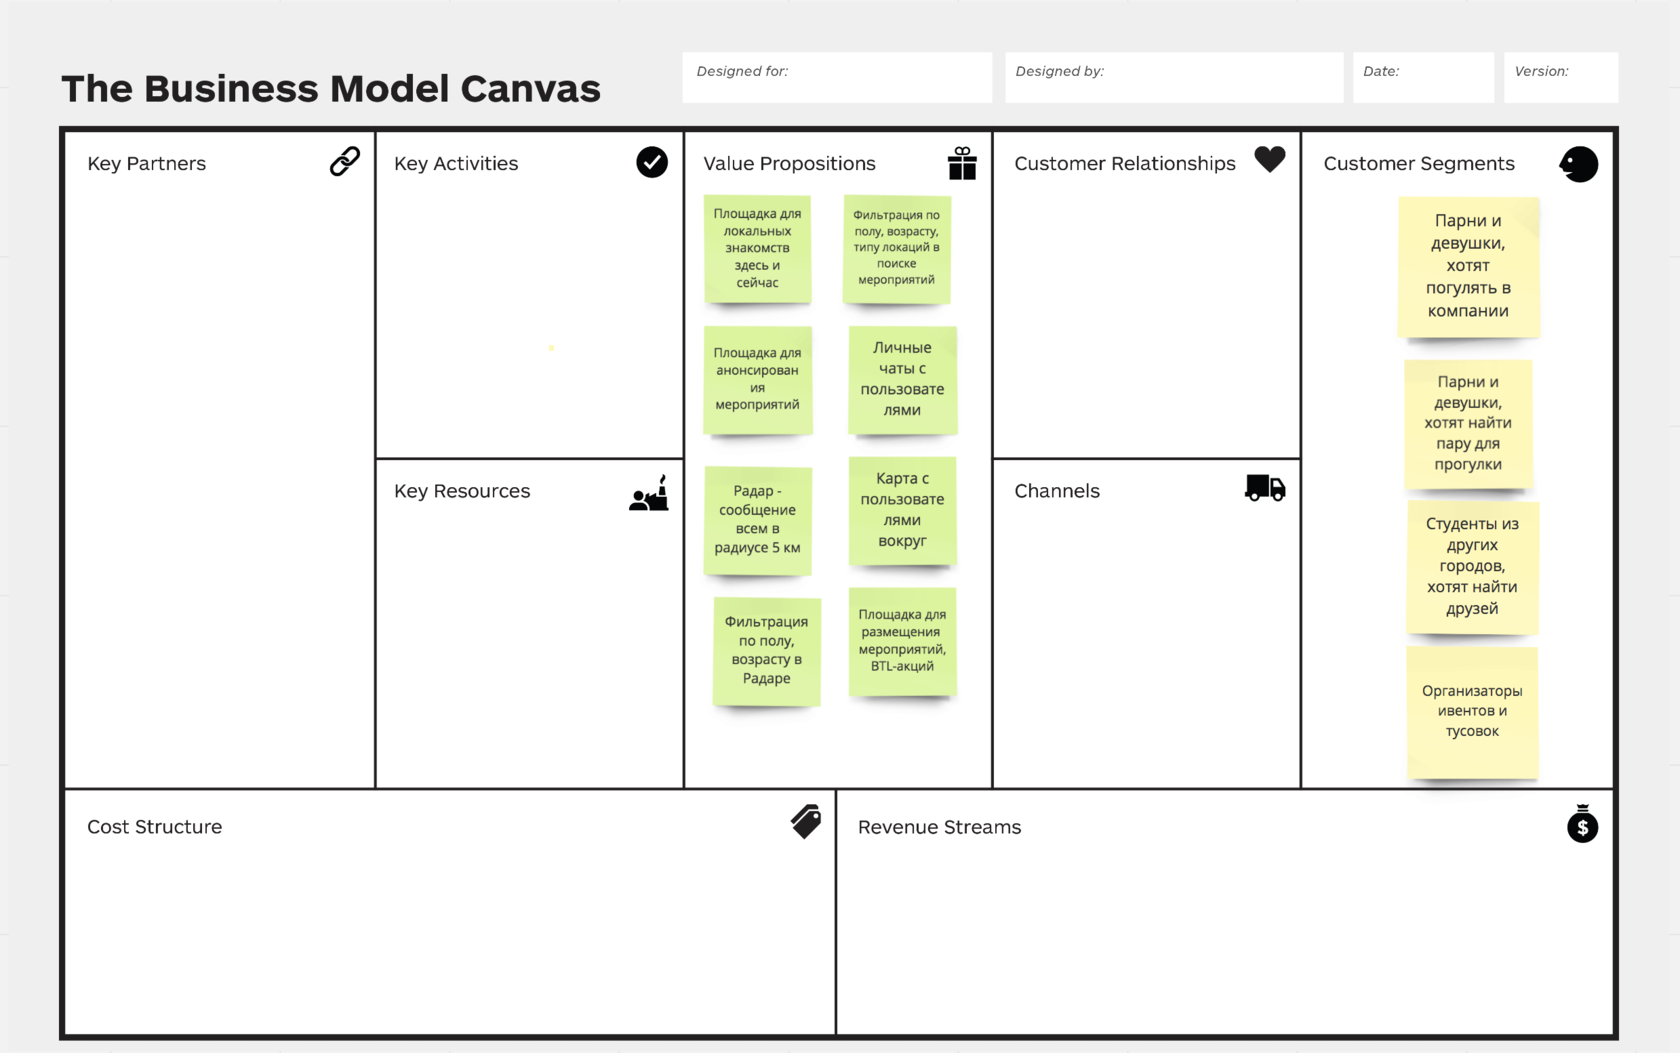 Bitcoin business model canvas pro tools 11 basics of investing